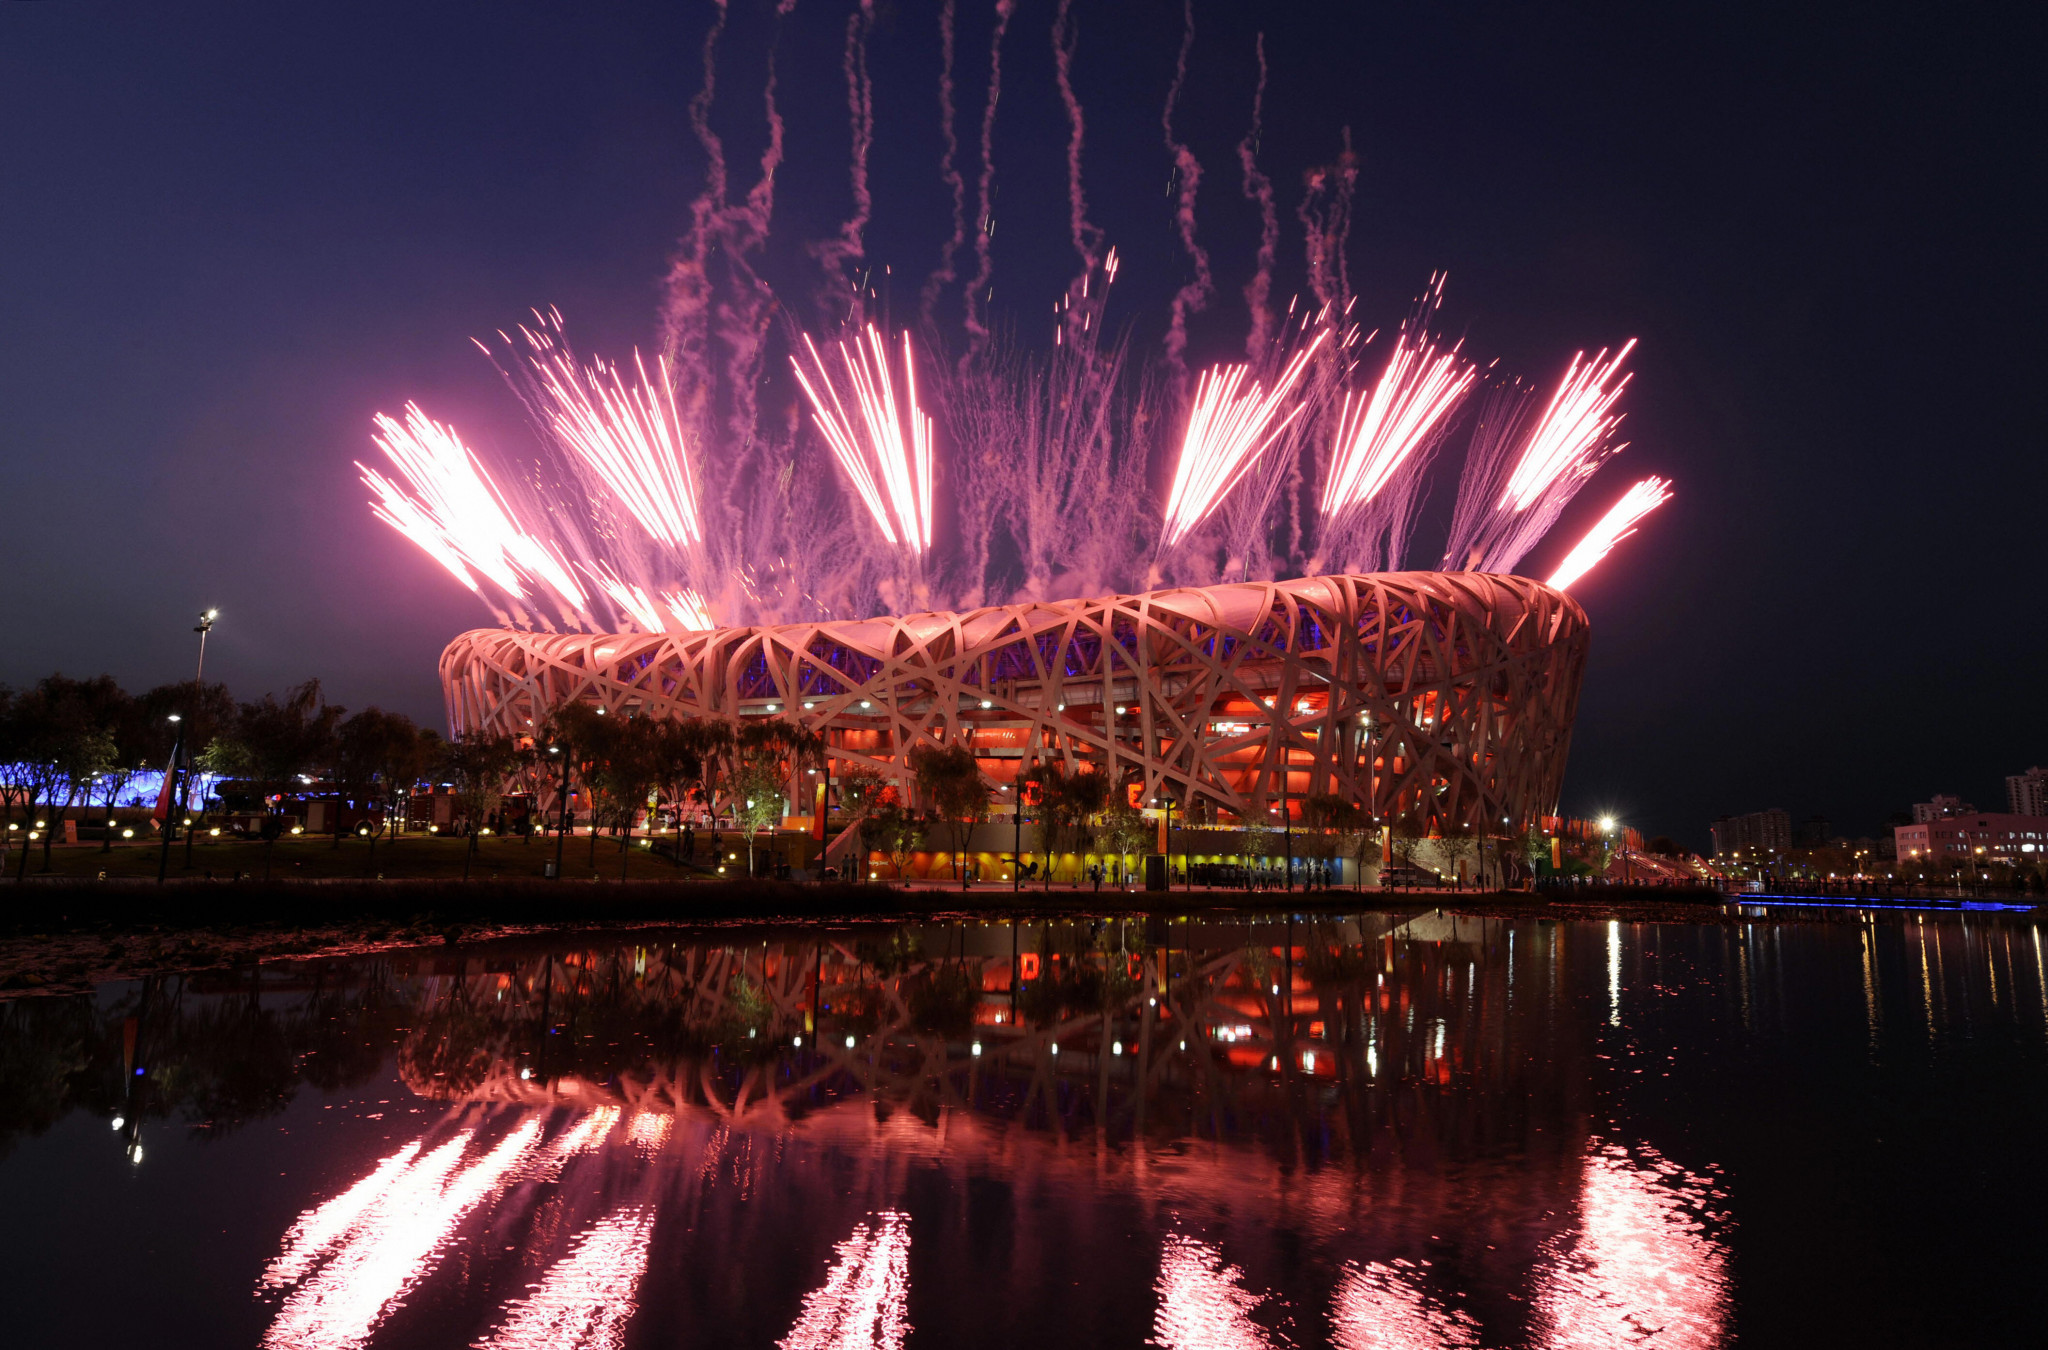 Beijing 2008 is approaching its 10th anniversary ©Getty Images